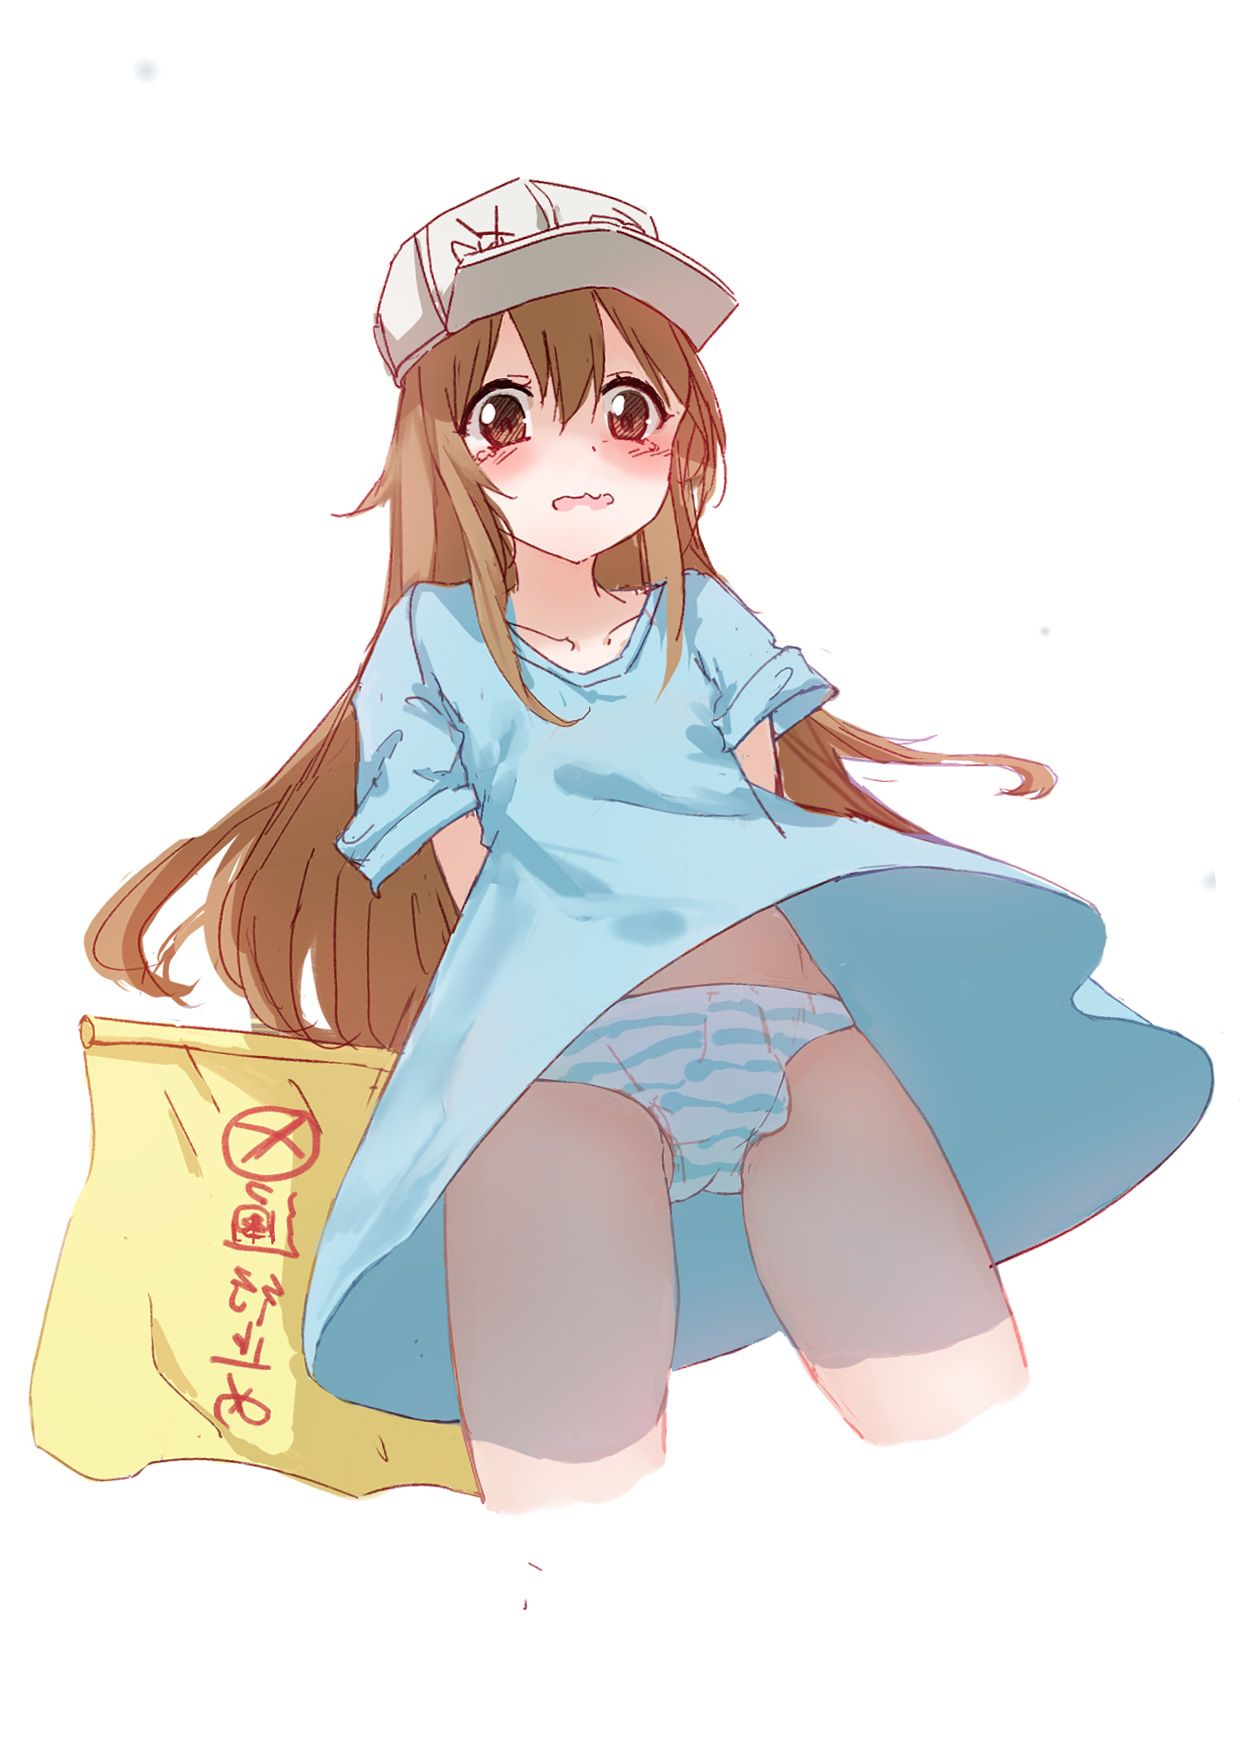 [Working cells] secondary images of platelets 1 60 sheets [ero/non-erotic] 37